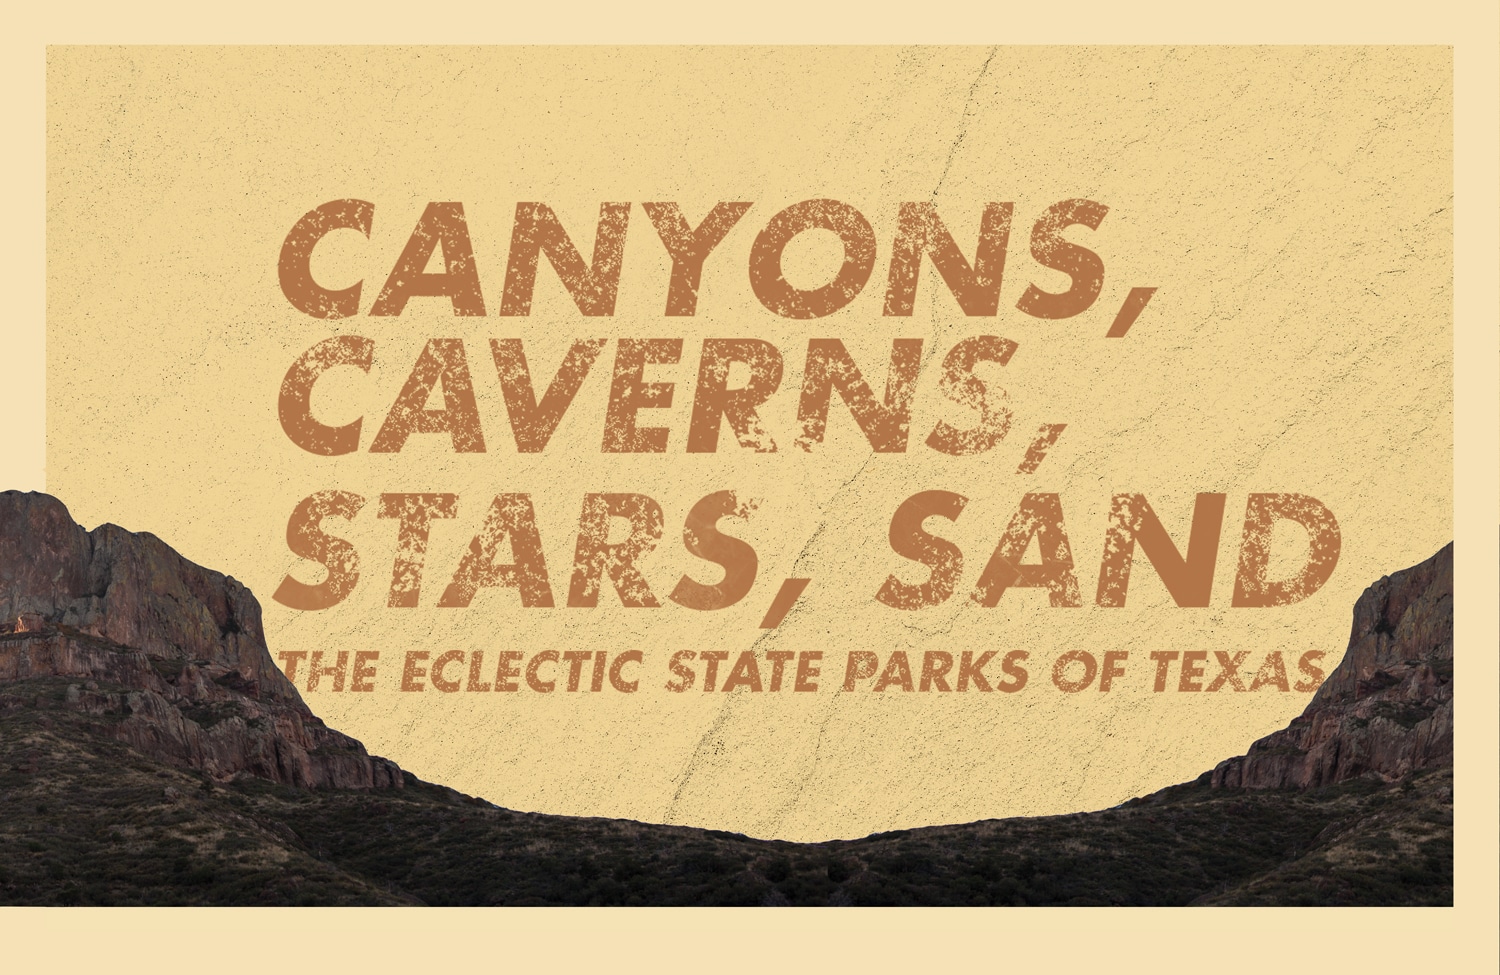 Travel to Texas' Eclectic State Parks Road Trip Travel